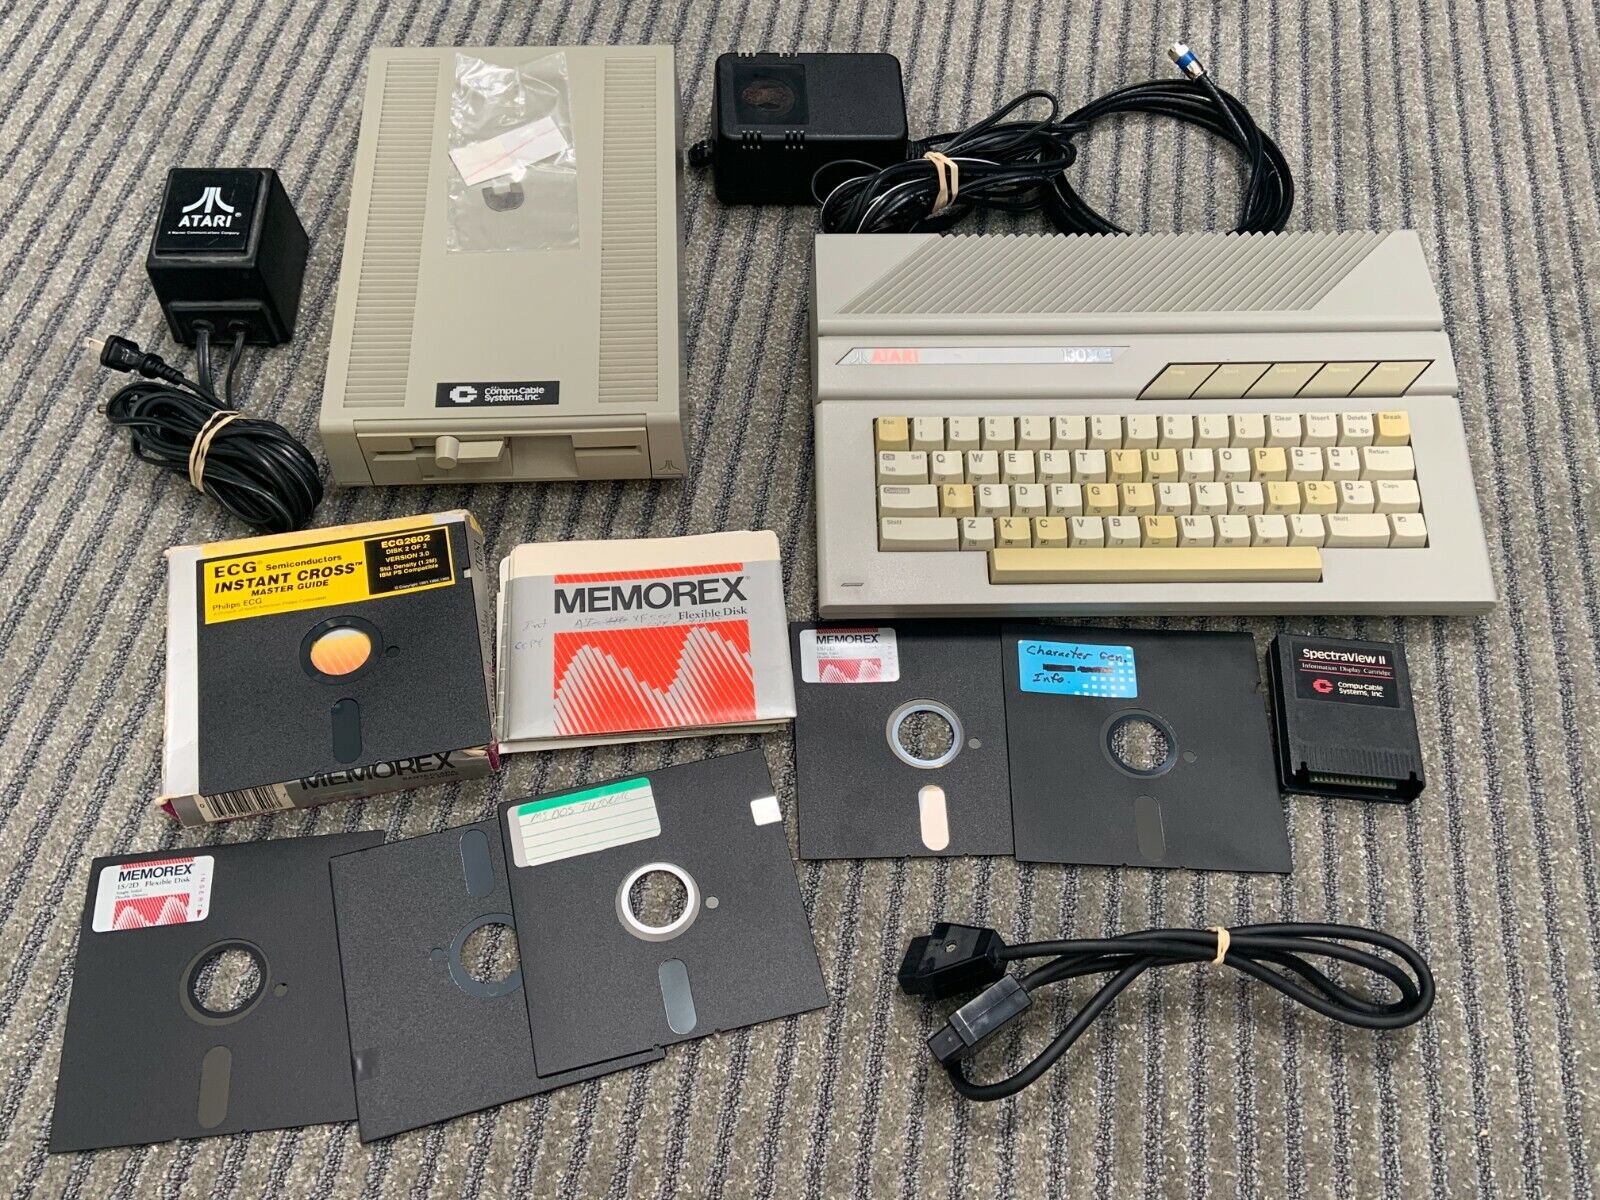 Atari XF551 Floppy Disk Drive & 130XE Keyboard Computer Power Supply Lot *AS-IS*